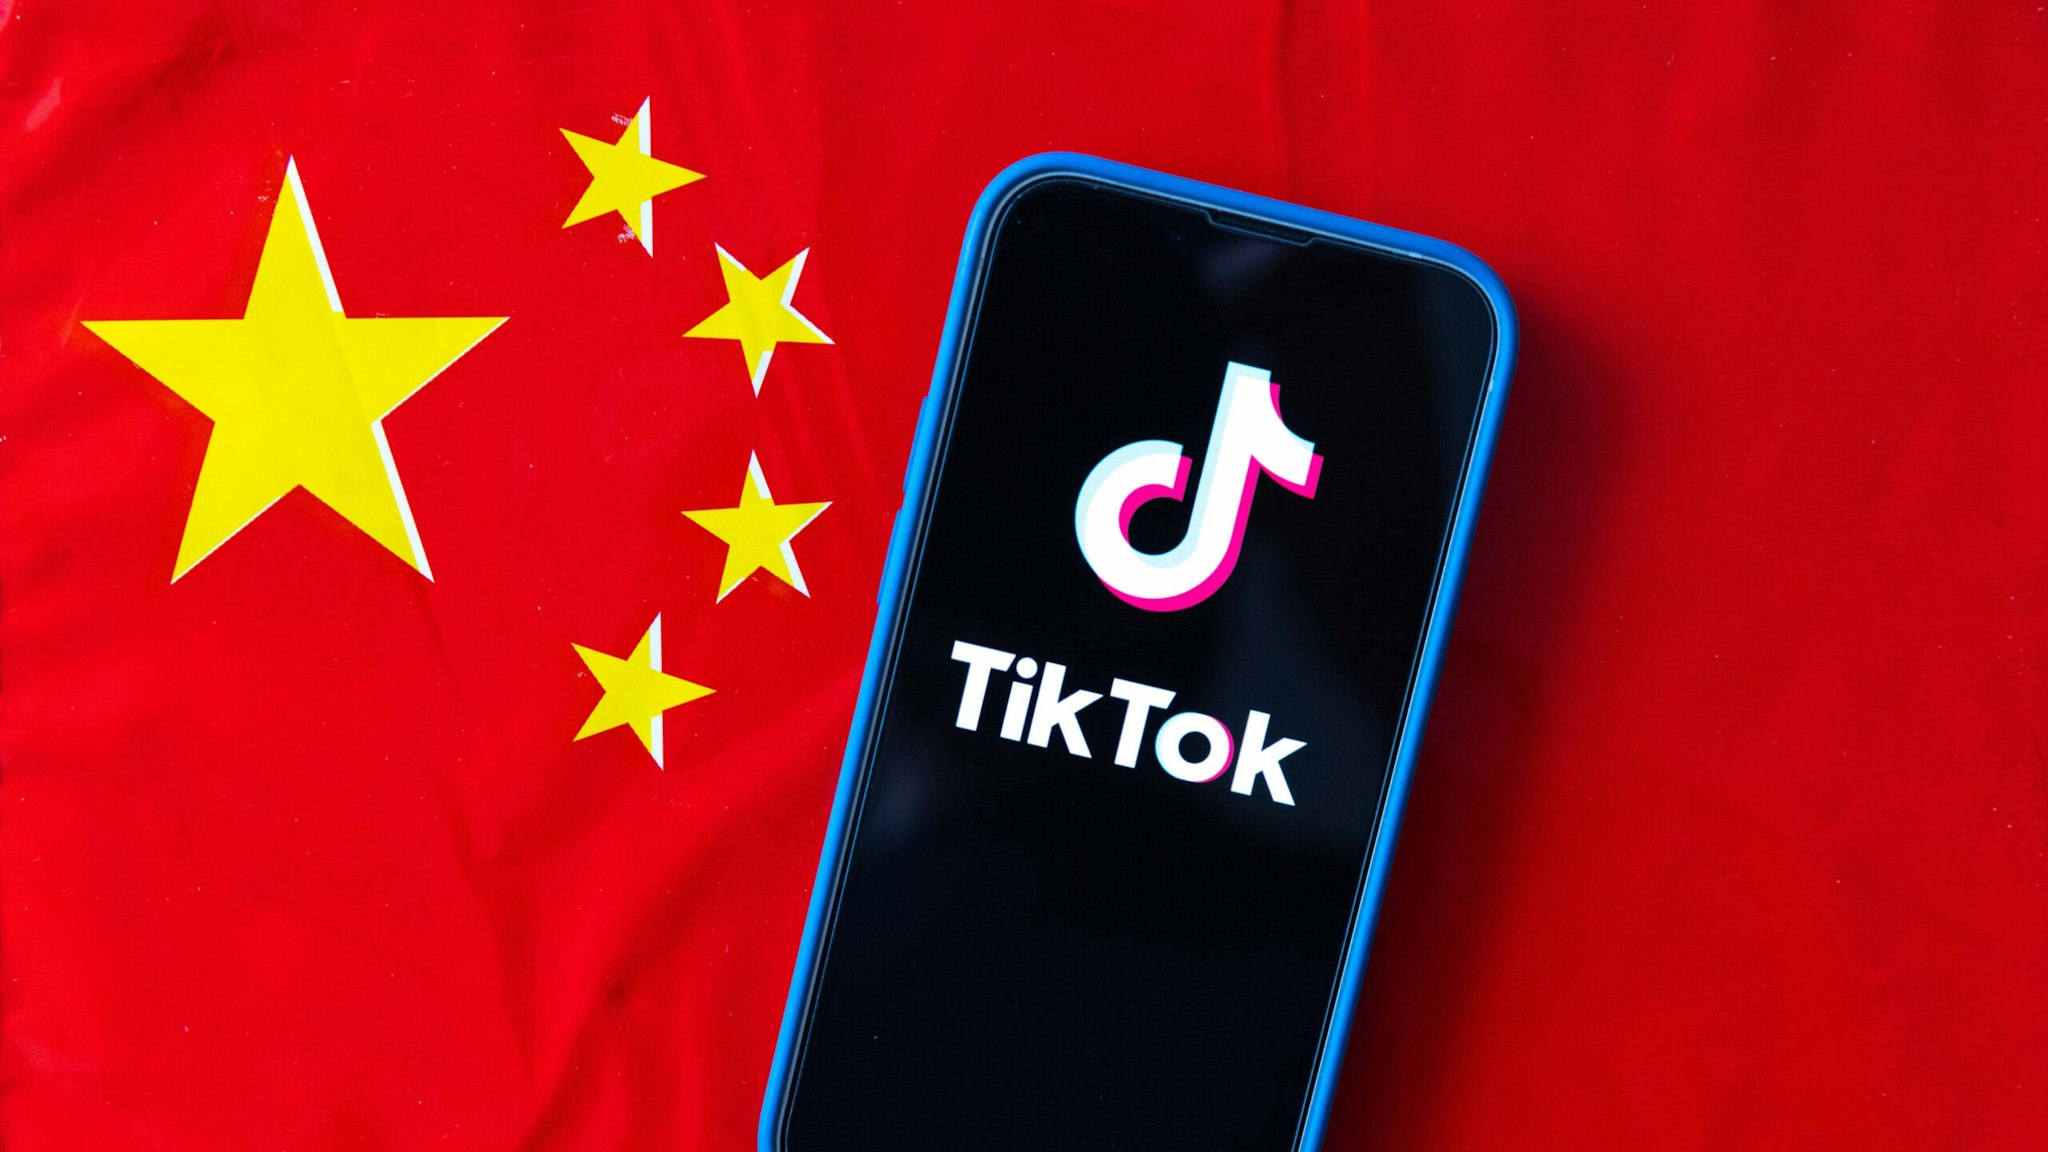 JAPAN - 2023/04/16: In this photo illustration, mobile phone displays TikTok logo with the flag of the People's Republic of China in the background.